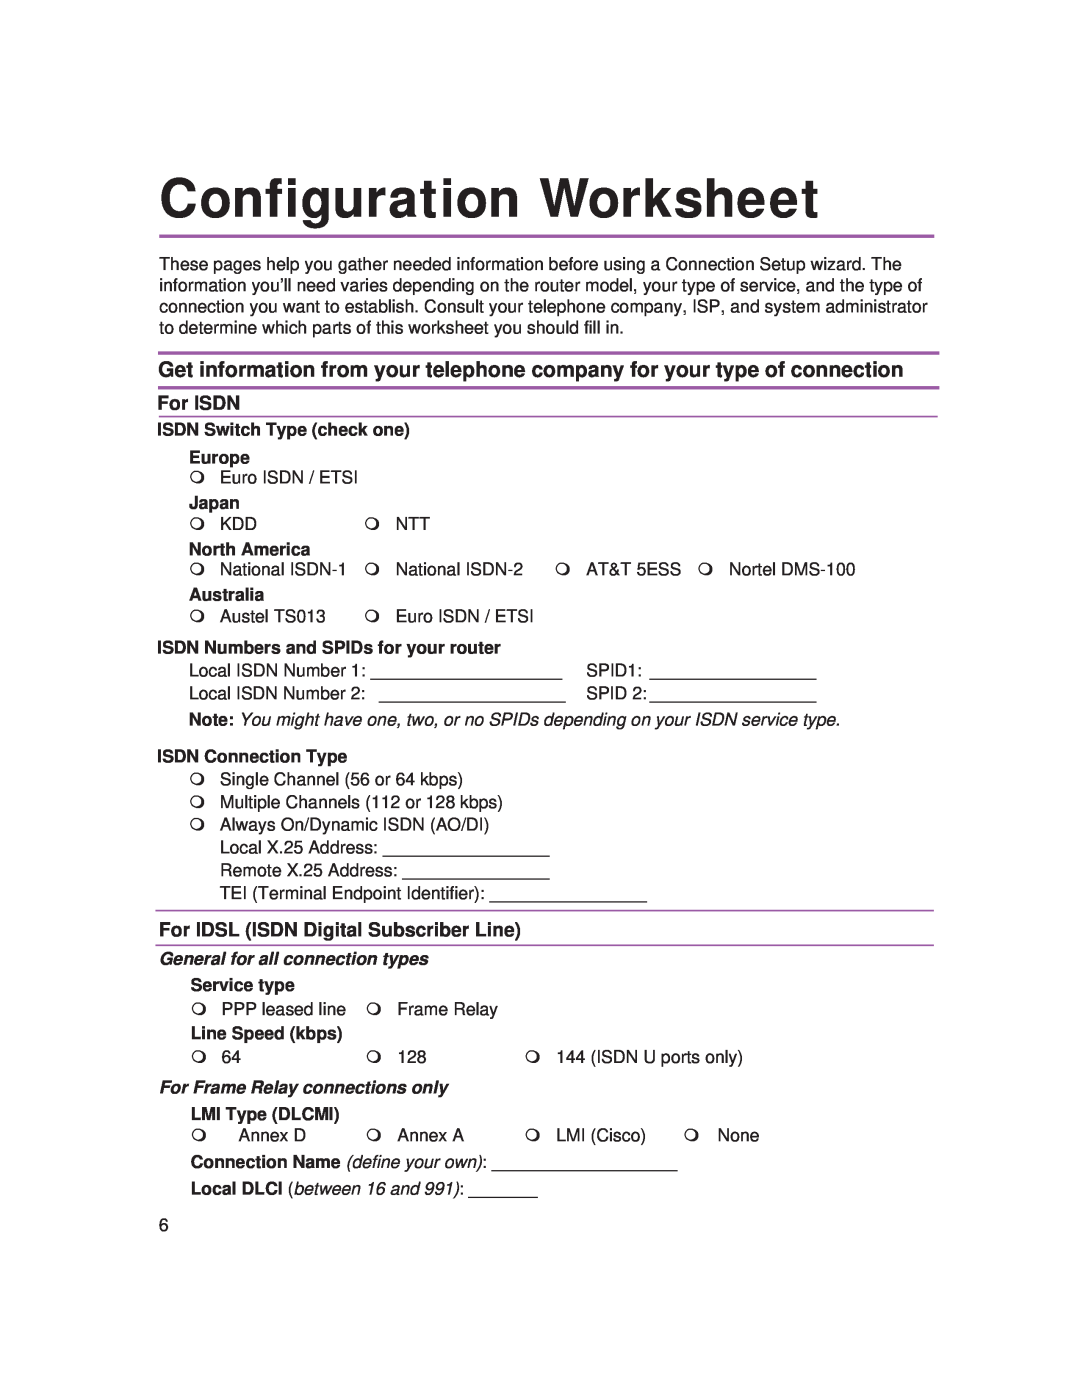 Intel 9545 Configuration Worksheet, For ISDN, For IDSL ISDN Digital Subscriber Line, General for all connection types 